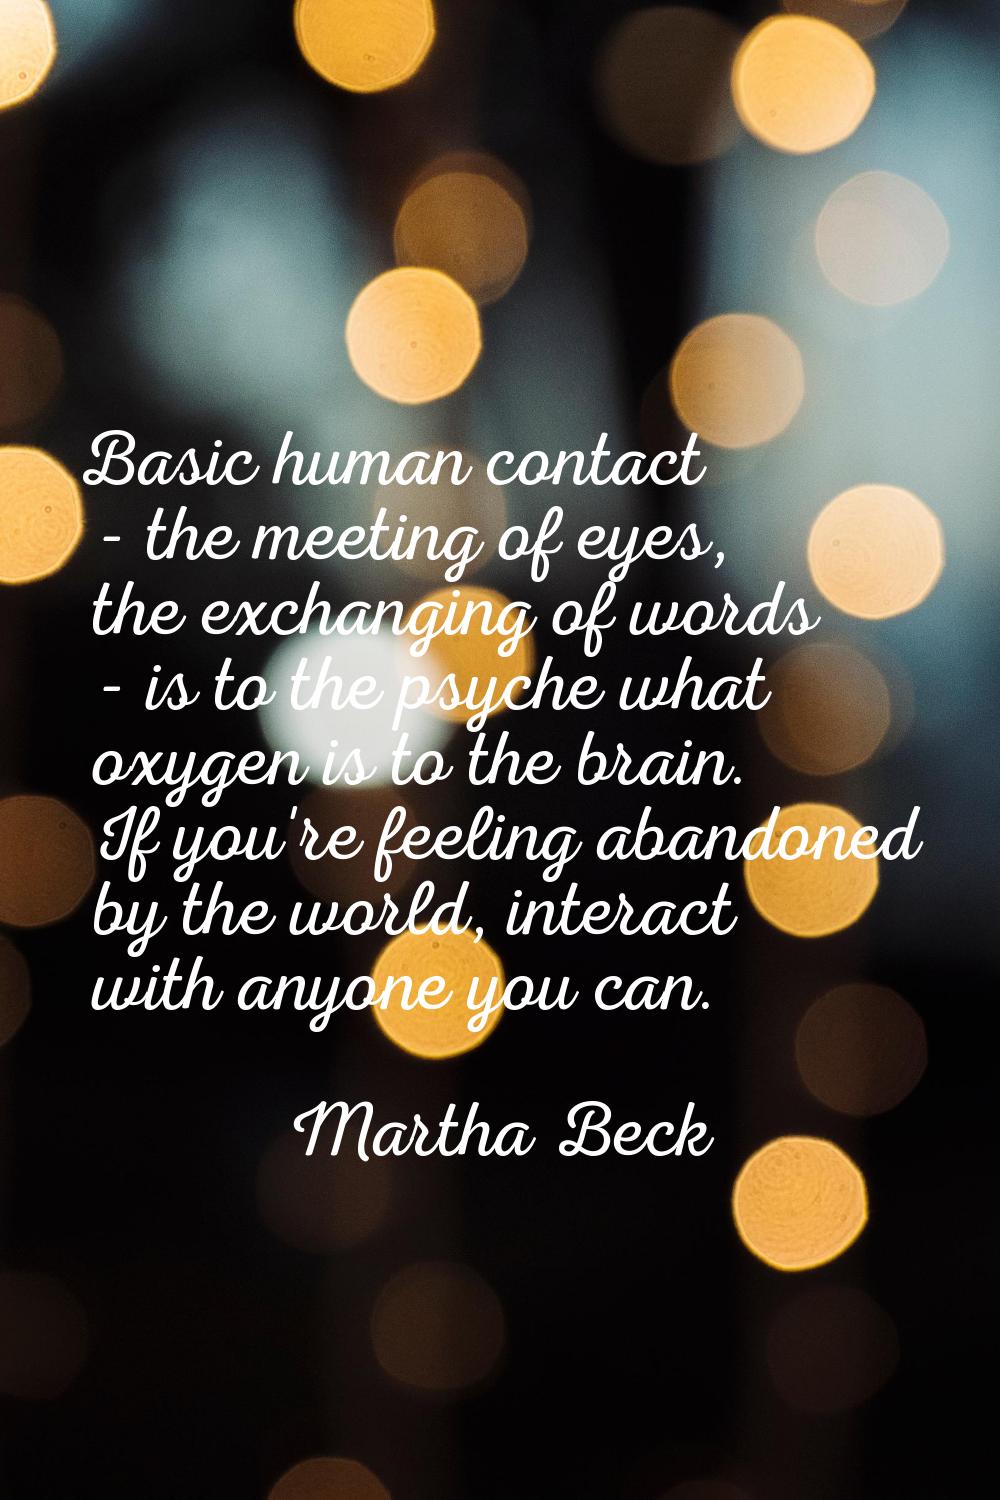 Basic human contact - the meeting of eyes, the exchanging of words - is to the psyche what oxygen i